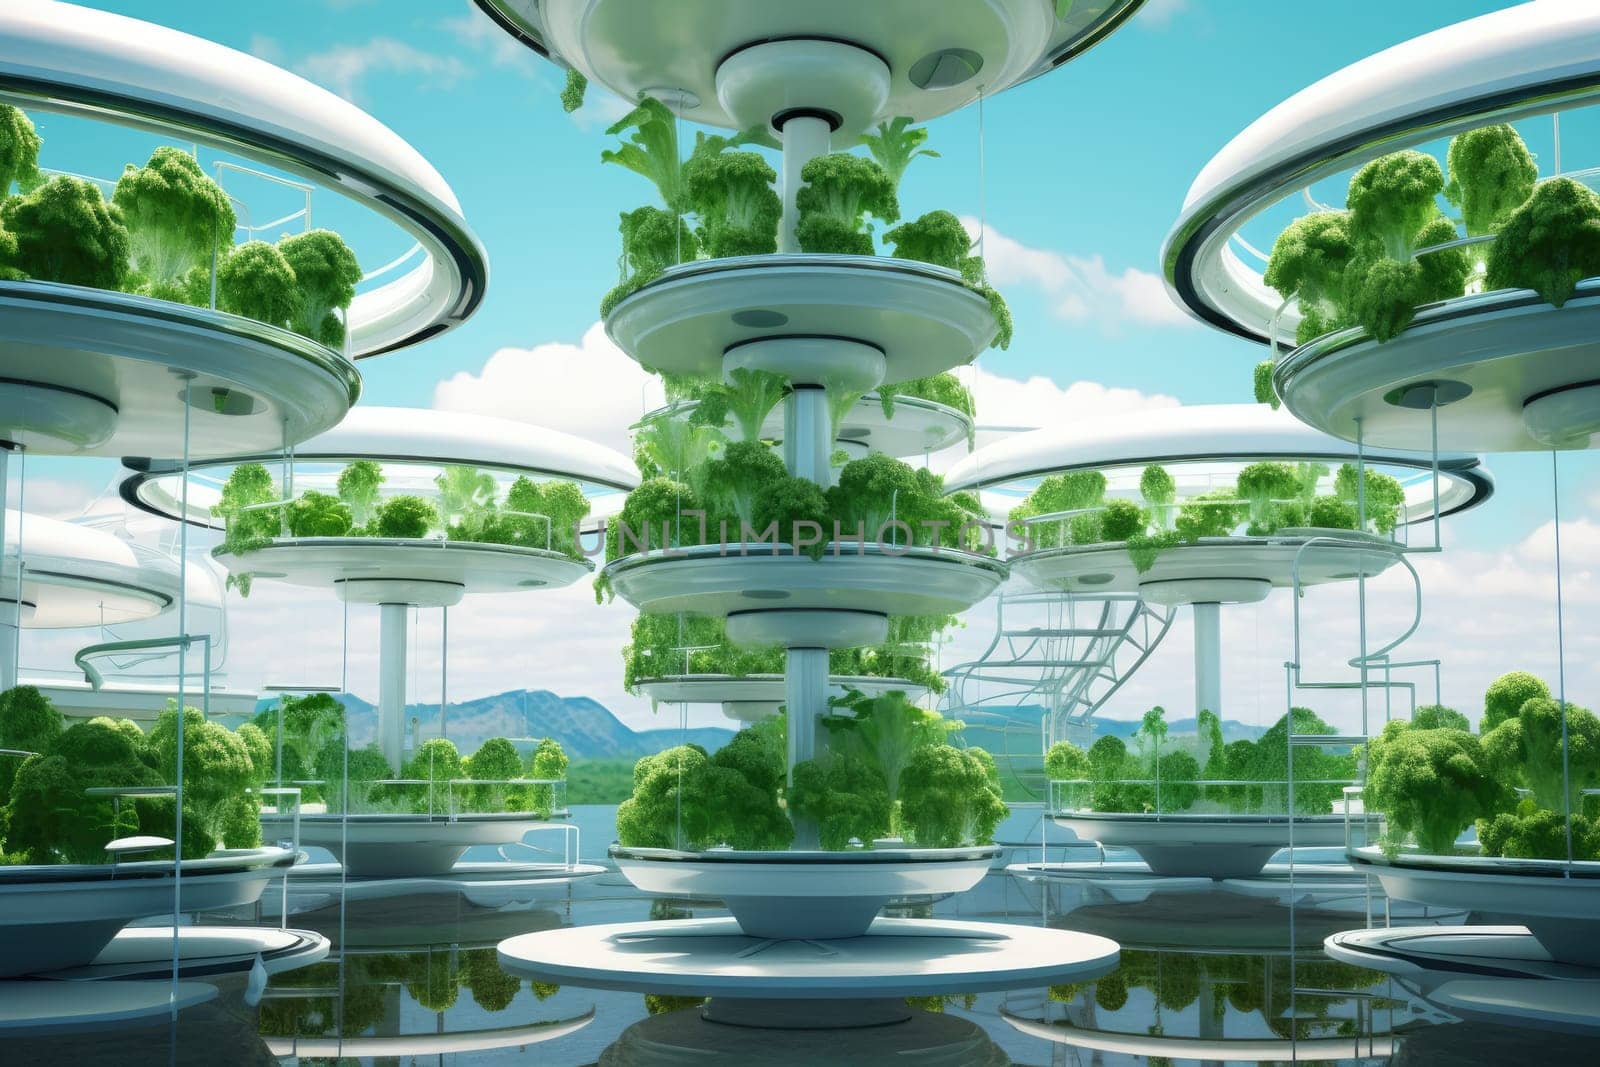 Exploring Hydroponics: Cultivating Plants Without Soil Using Nutrient Solutions by Yurich32